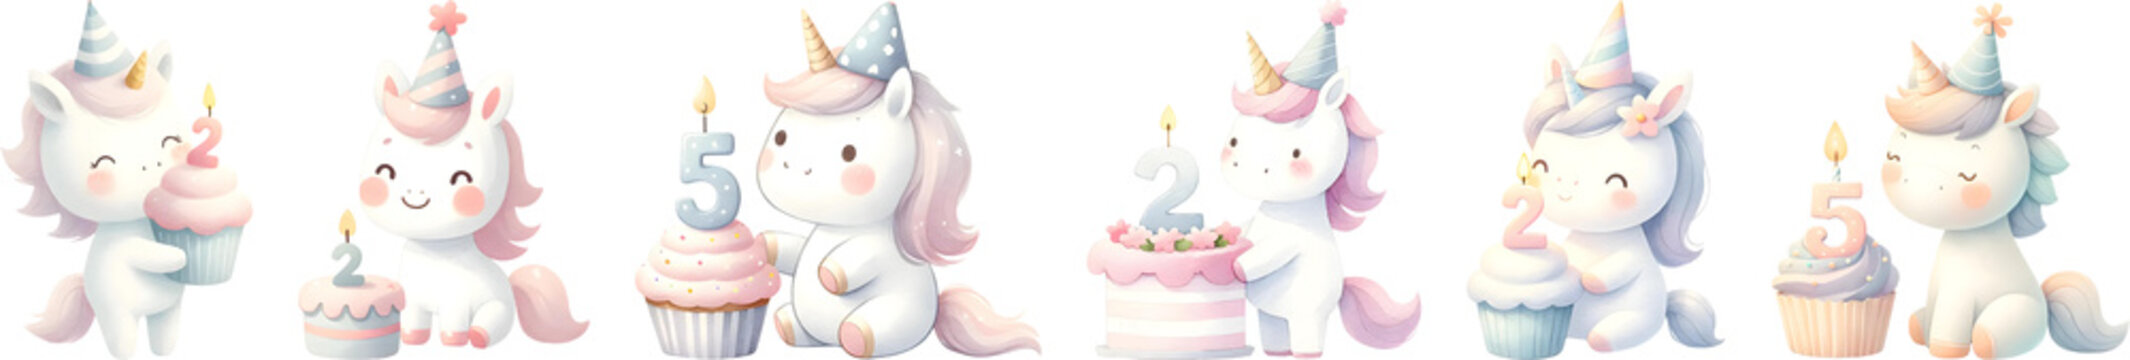 Watercolor of unicorn birthday with cake for kids.